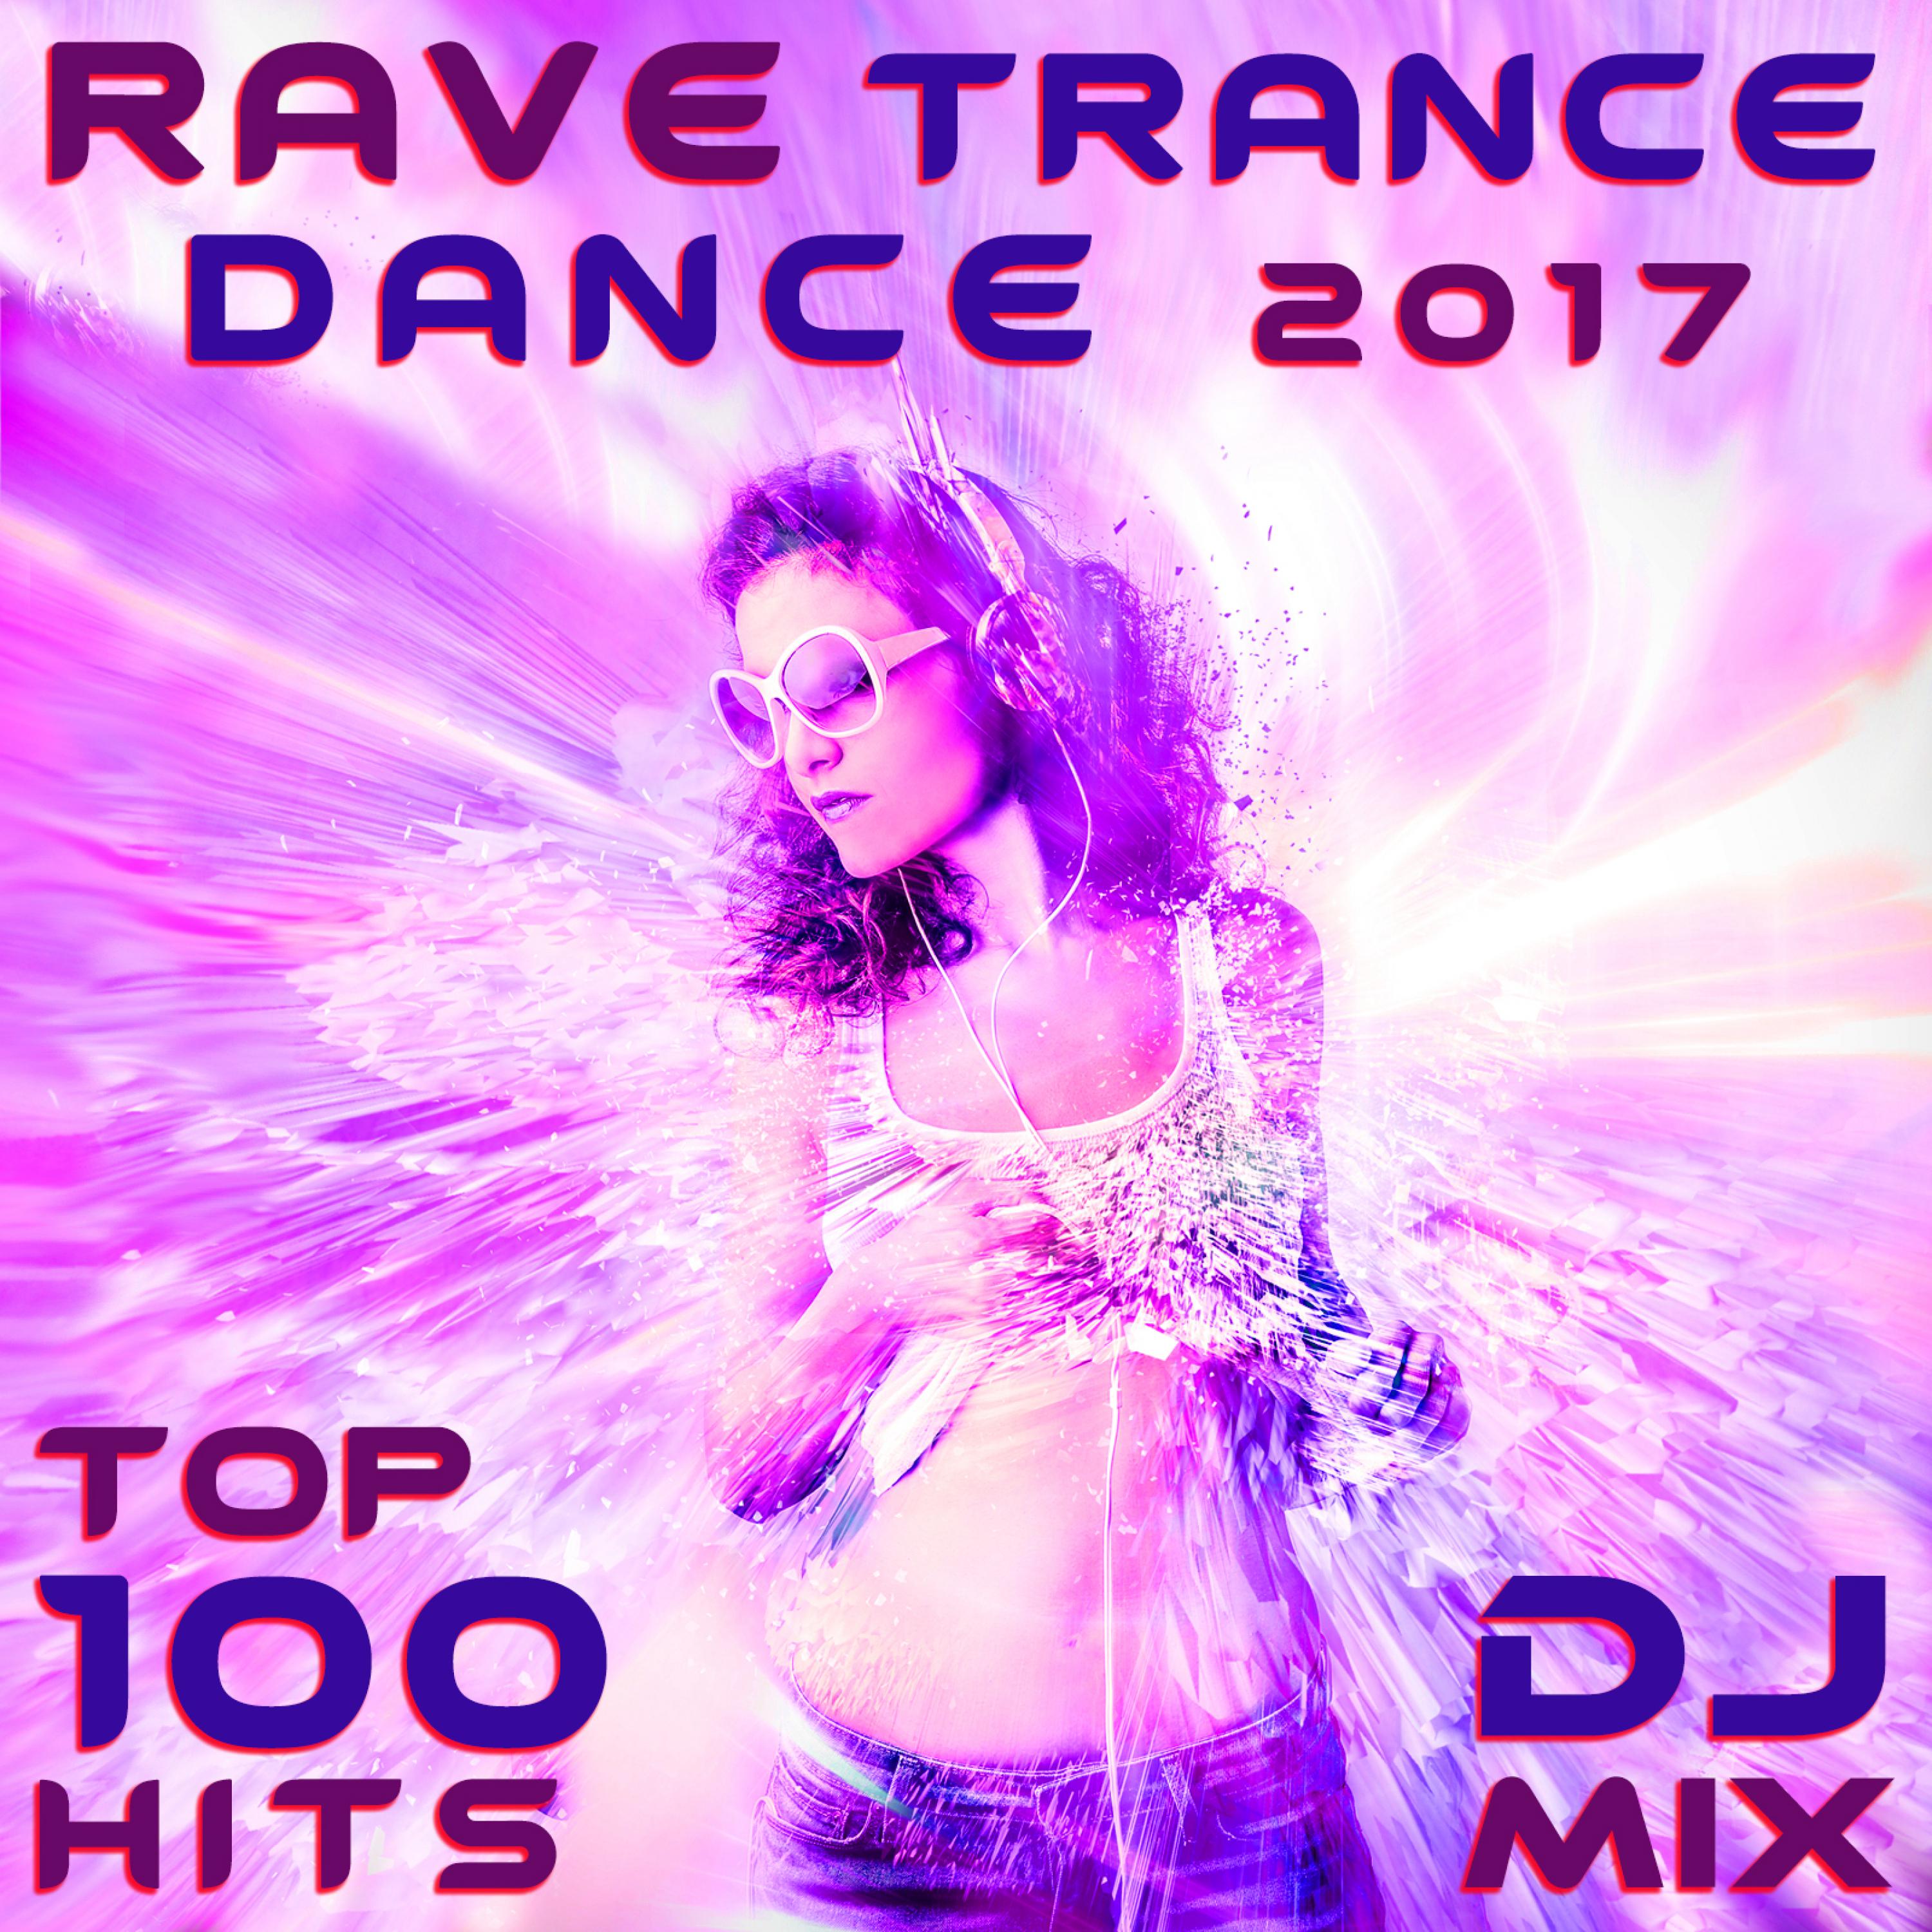 Open Source - From Athens With Love (Rave Trance Dance 2017 DJ Mix Edit)